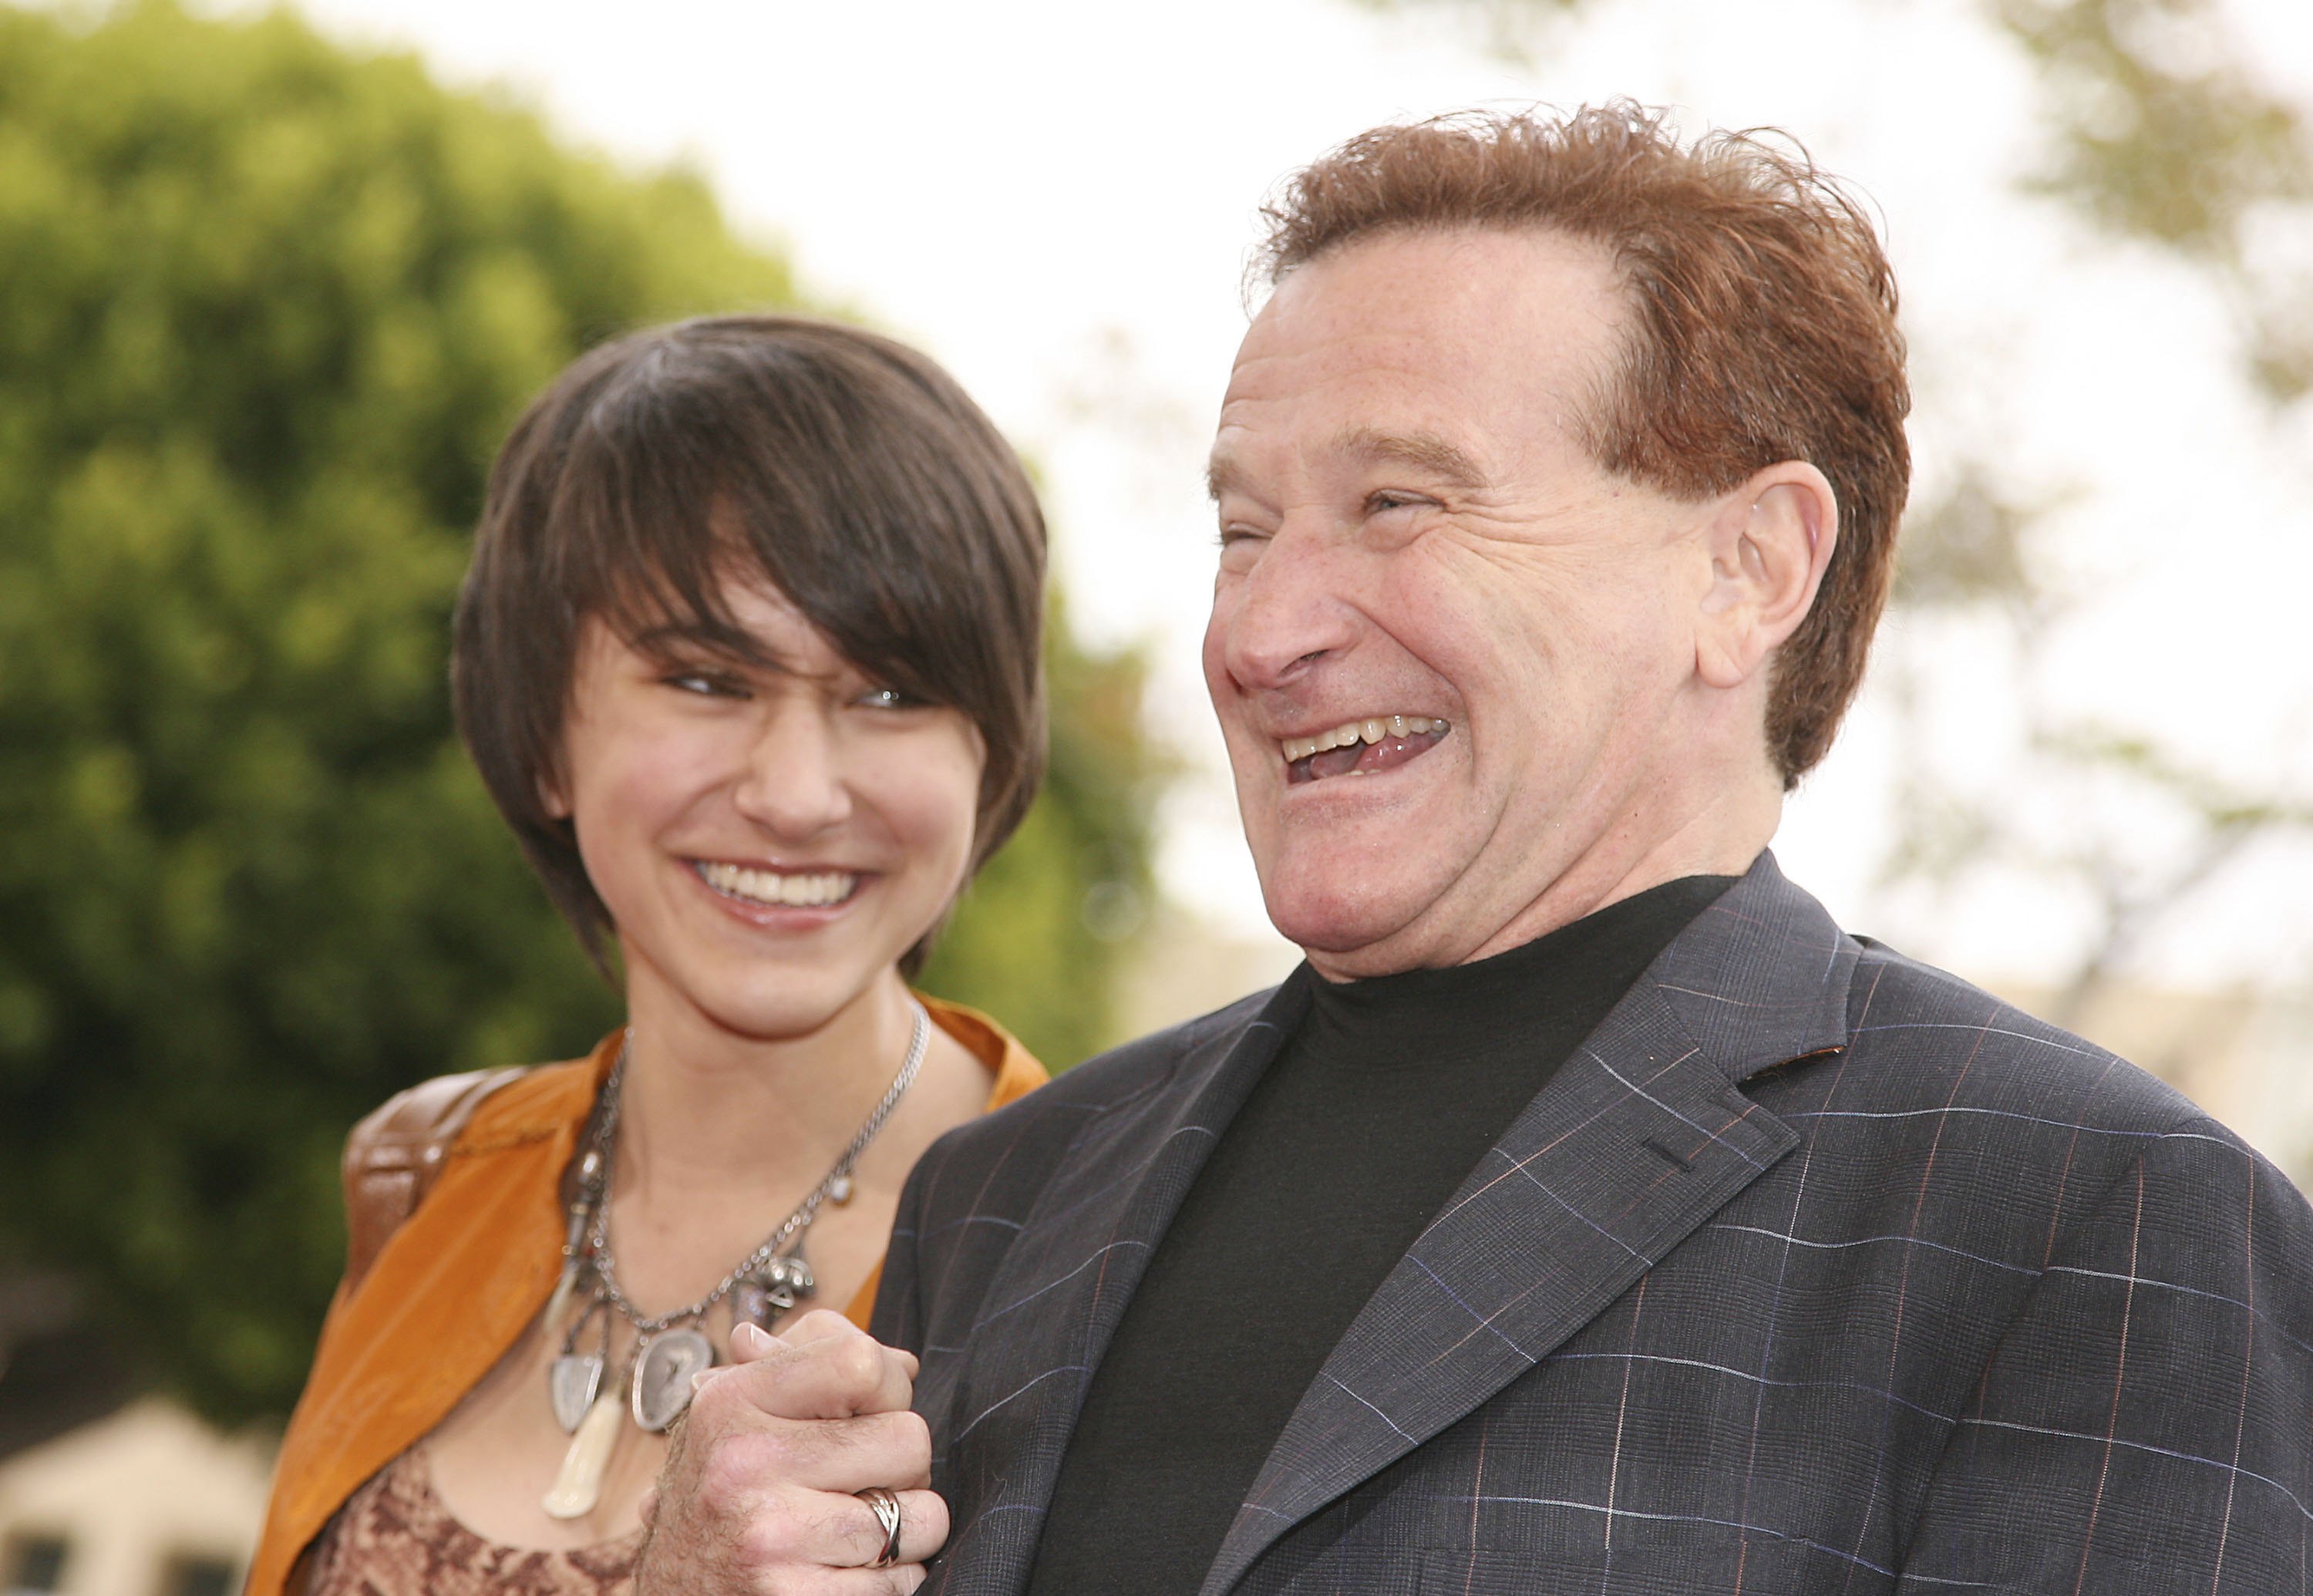 Robin Williams (R) and daughter Zalda pose at the premiere of Columbia Picture's "RV" at the Village Theater on April 23, 2006 in Los Angeles, California | Source: Getty Images